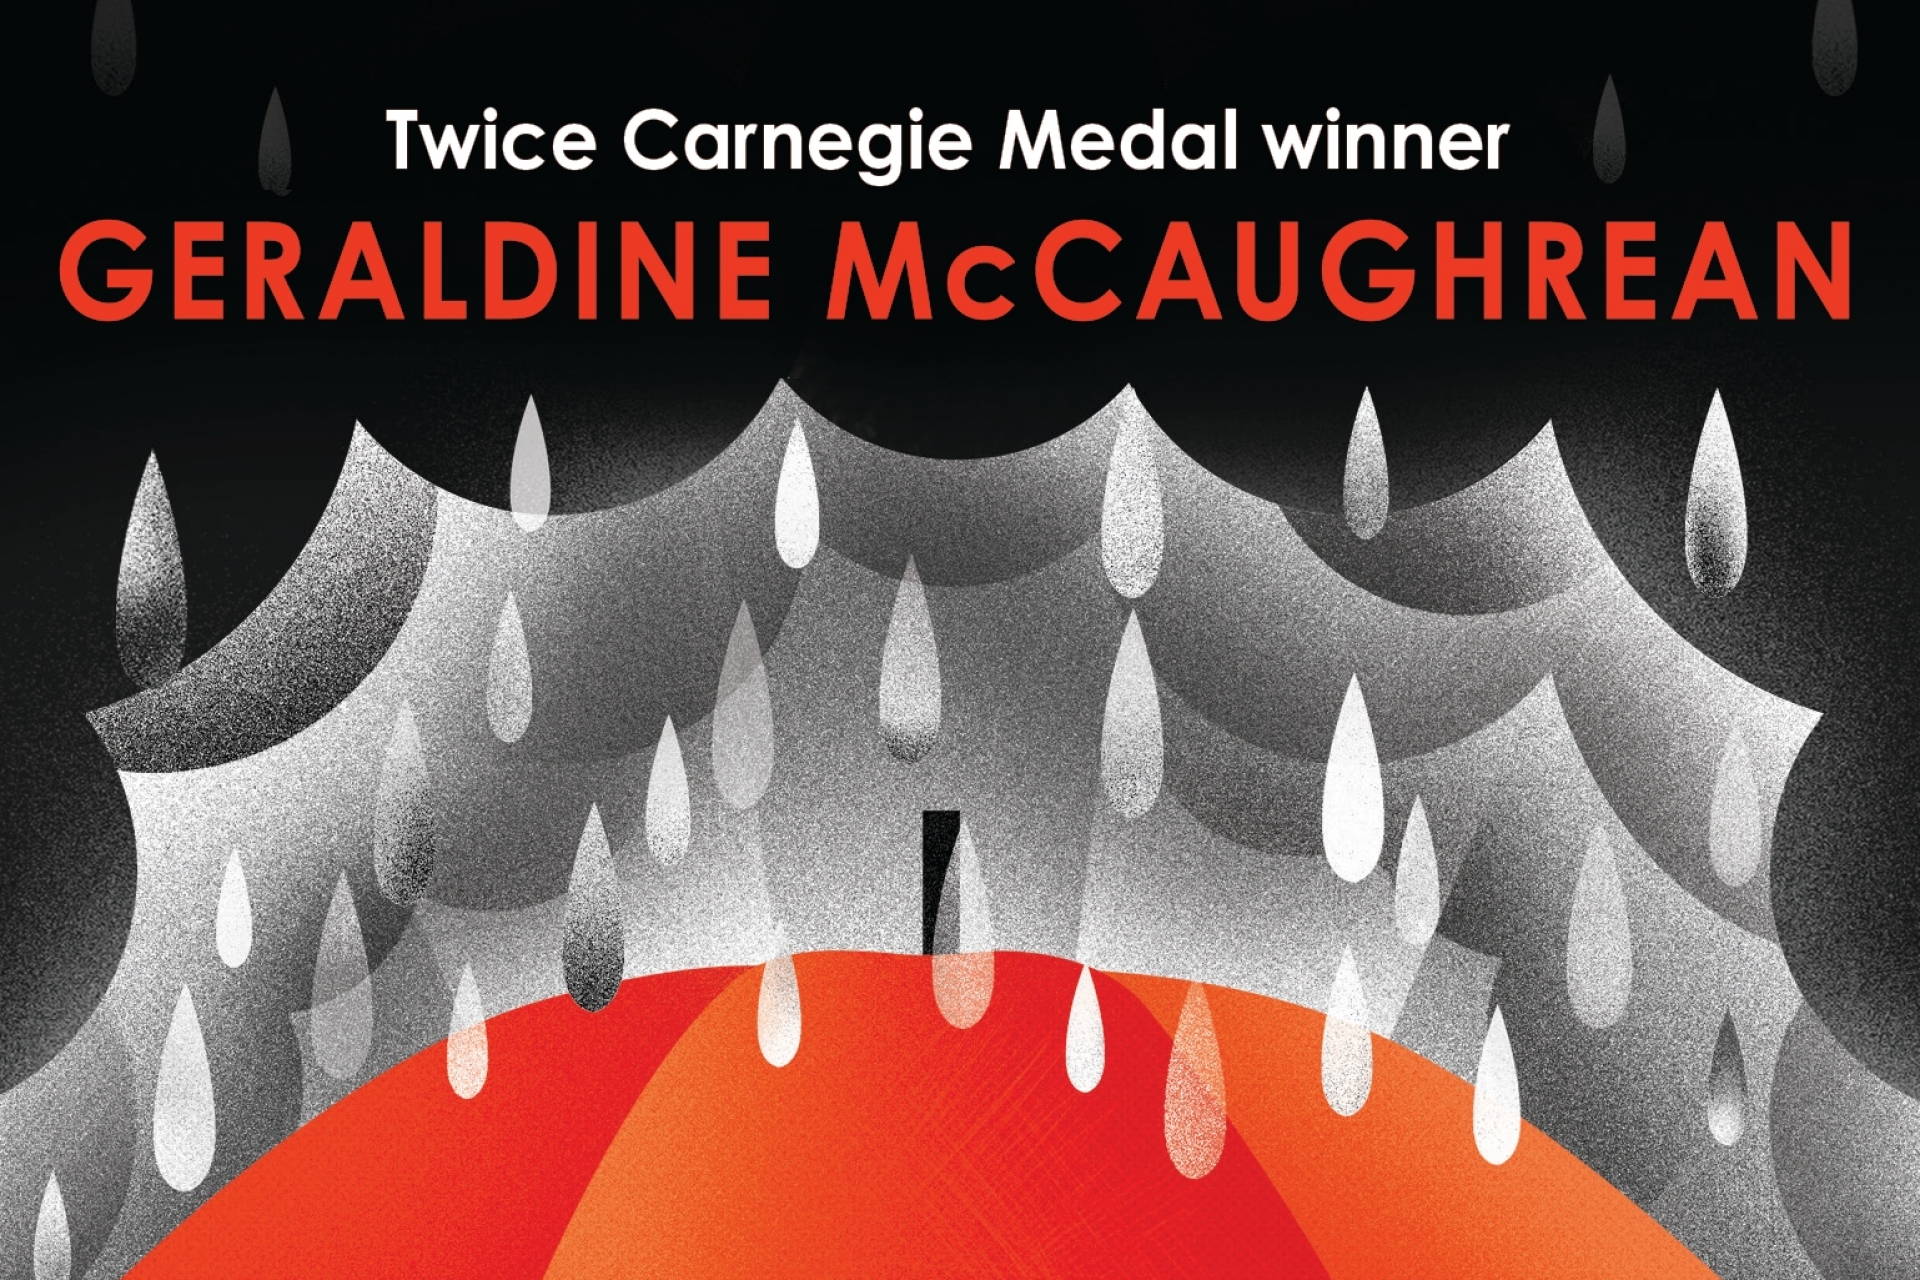 A Q&A with the supremely talented Geraldine McCaughrean